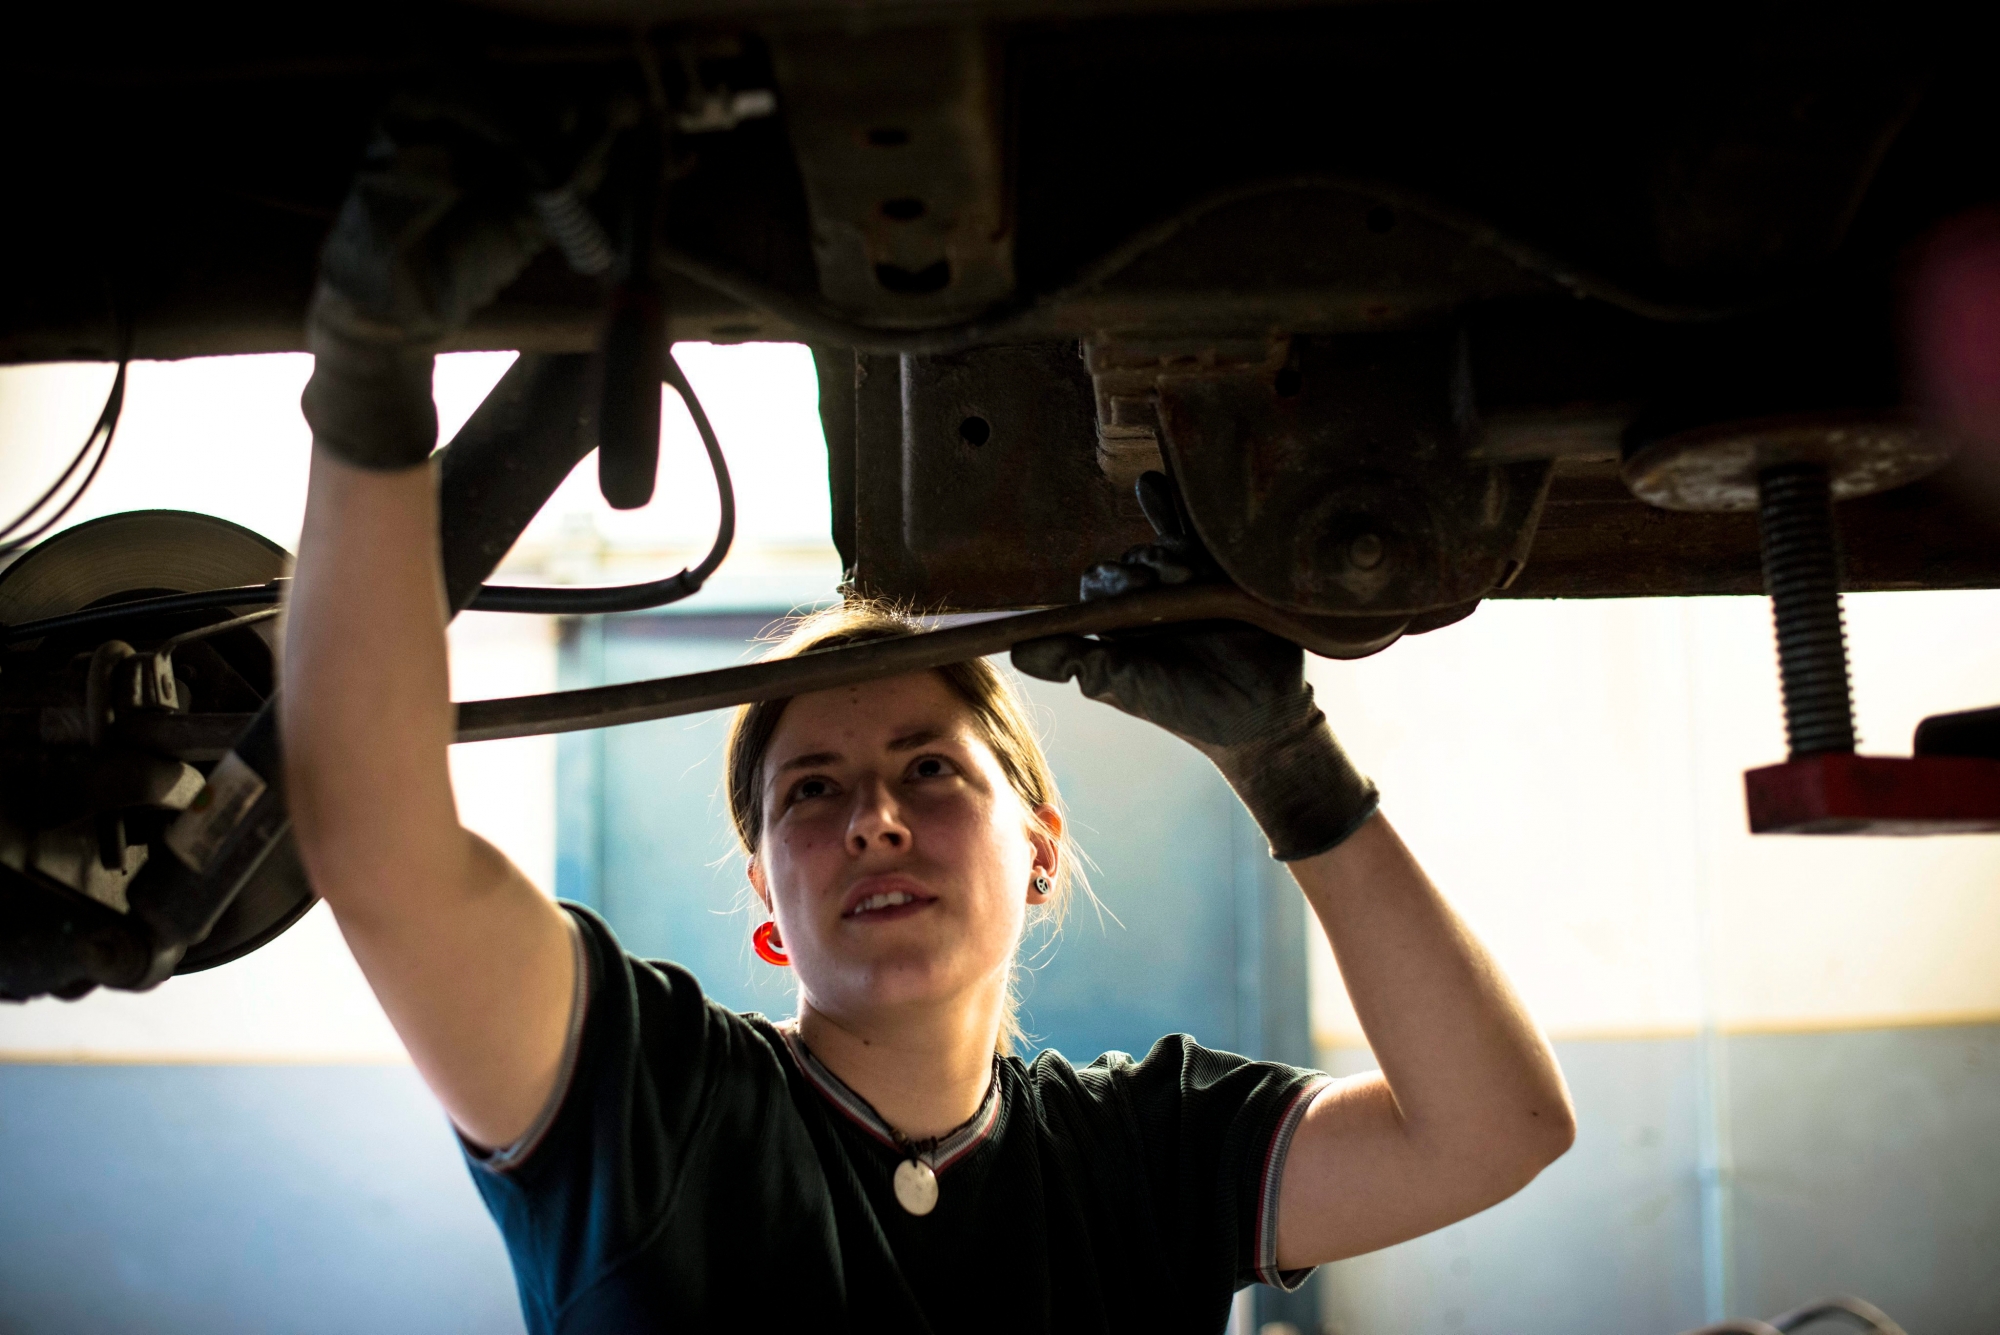 epa05199596 (11/27) Car mechanic Adrienn Jandzso works in the repair workshop of the Veszprem Department of the National Ambulance Service in Veszprem, 108 kms southwest of Budapest, Hungary, 25 February 2016. The photo series was created to mark the upcoming International Women's Day (IWD), which was marked for the first time in 1911 and is celebrated on 08 March since 1913. March 08 was proclaimed by the United Nations General Assembly as the day for women's rights and world peace in 1977.  EPA/BEA KALLOS PLEASE REFER TO ADVISORY NOTICE (epa05199585) FOR FULL PACKAGE TEXT ++ HUNGARY OUT UNGARN TAG DER FRAU